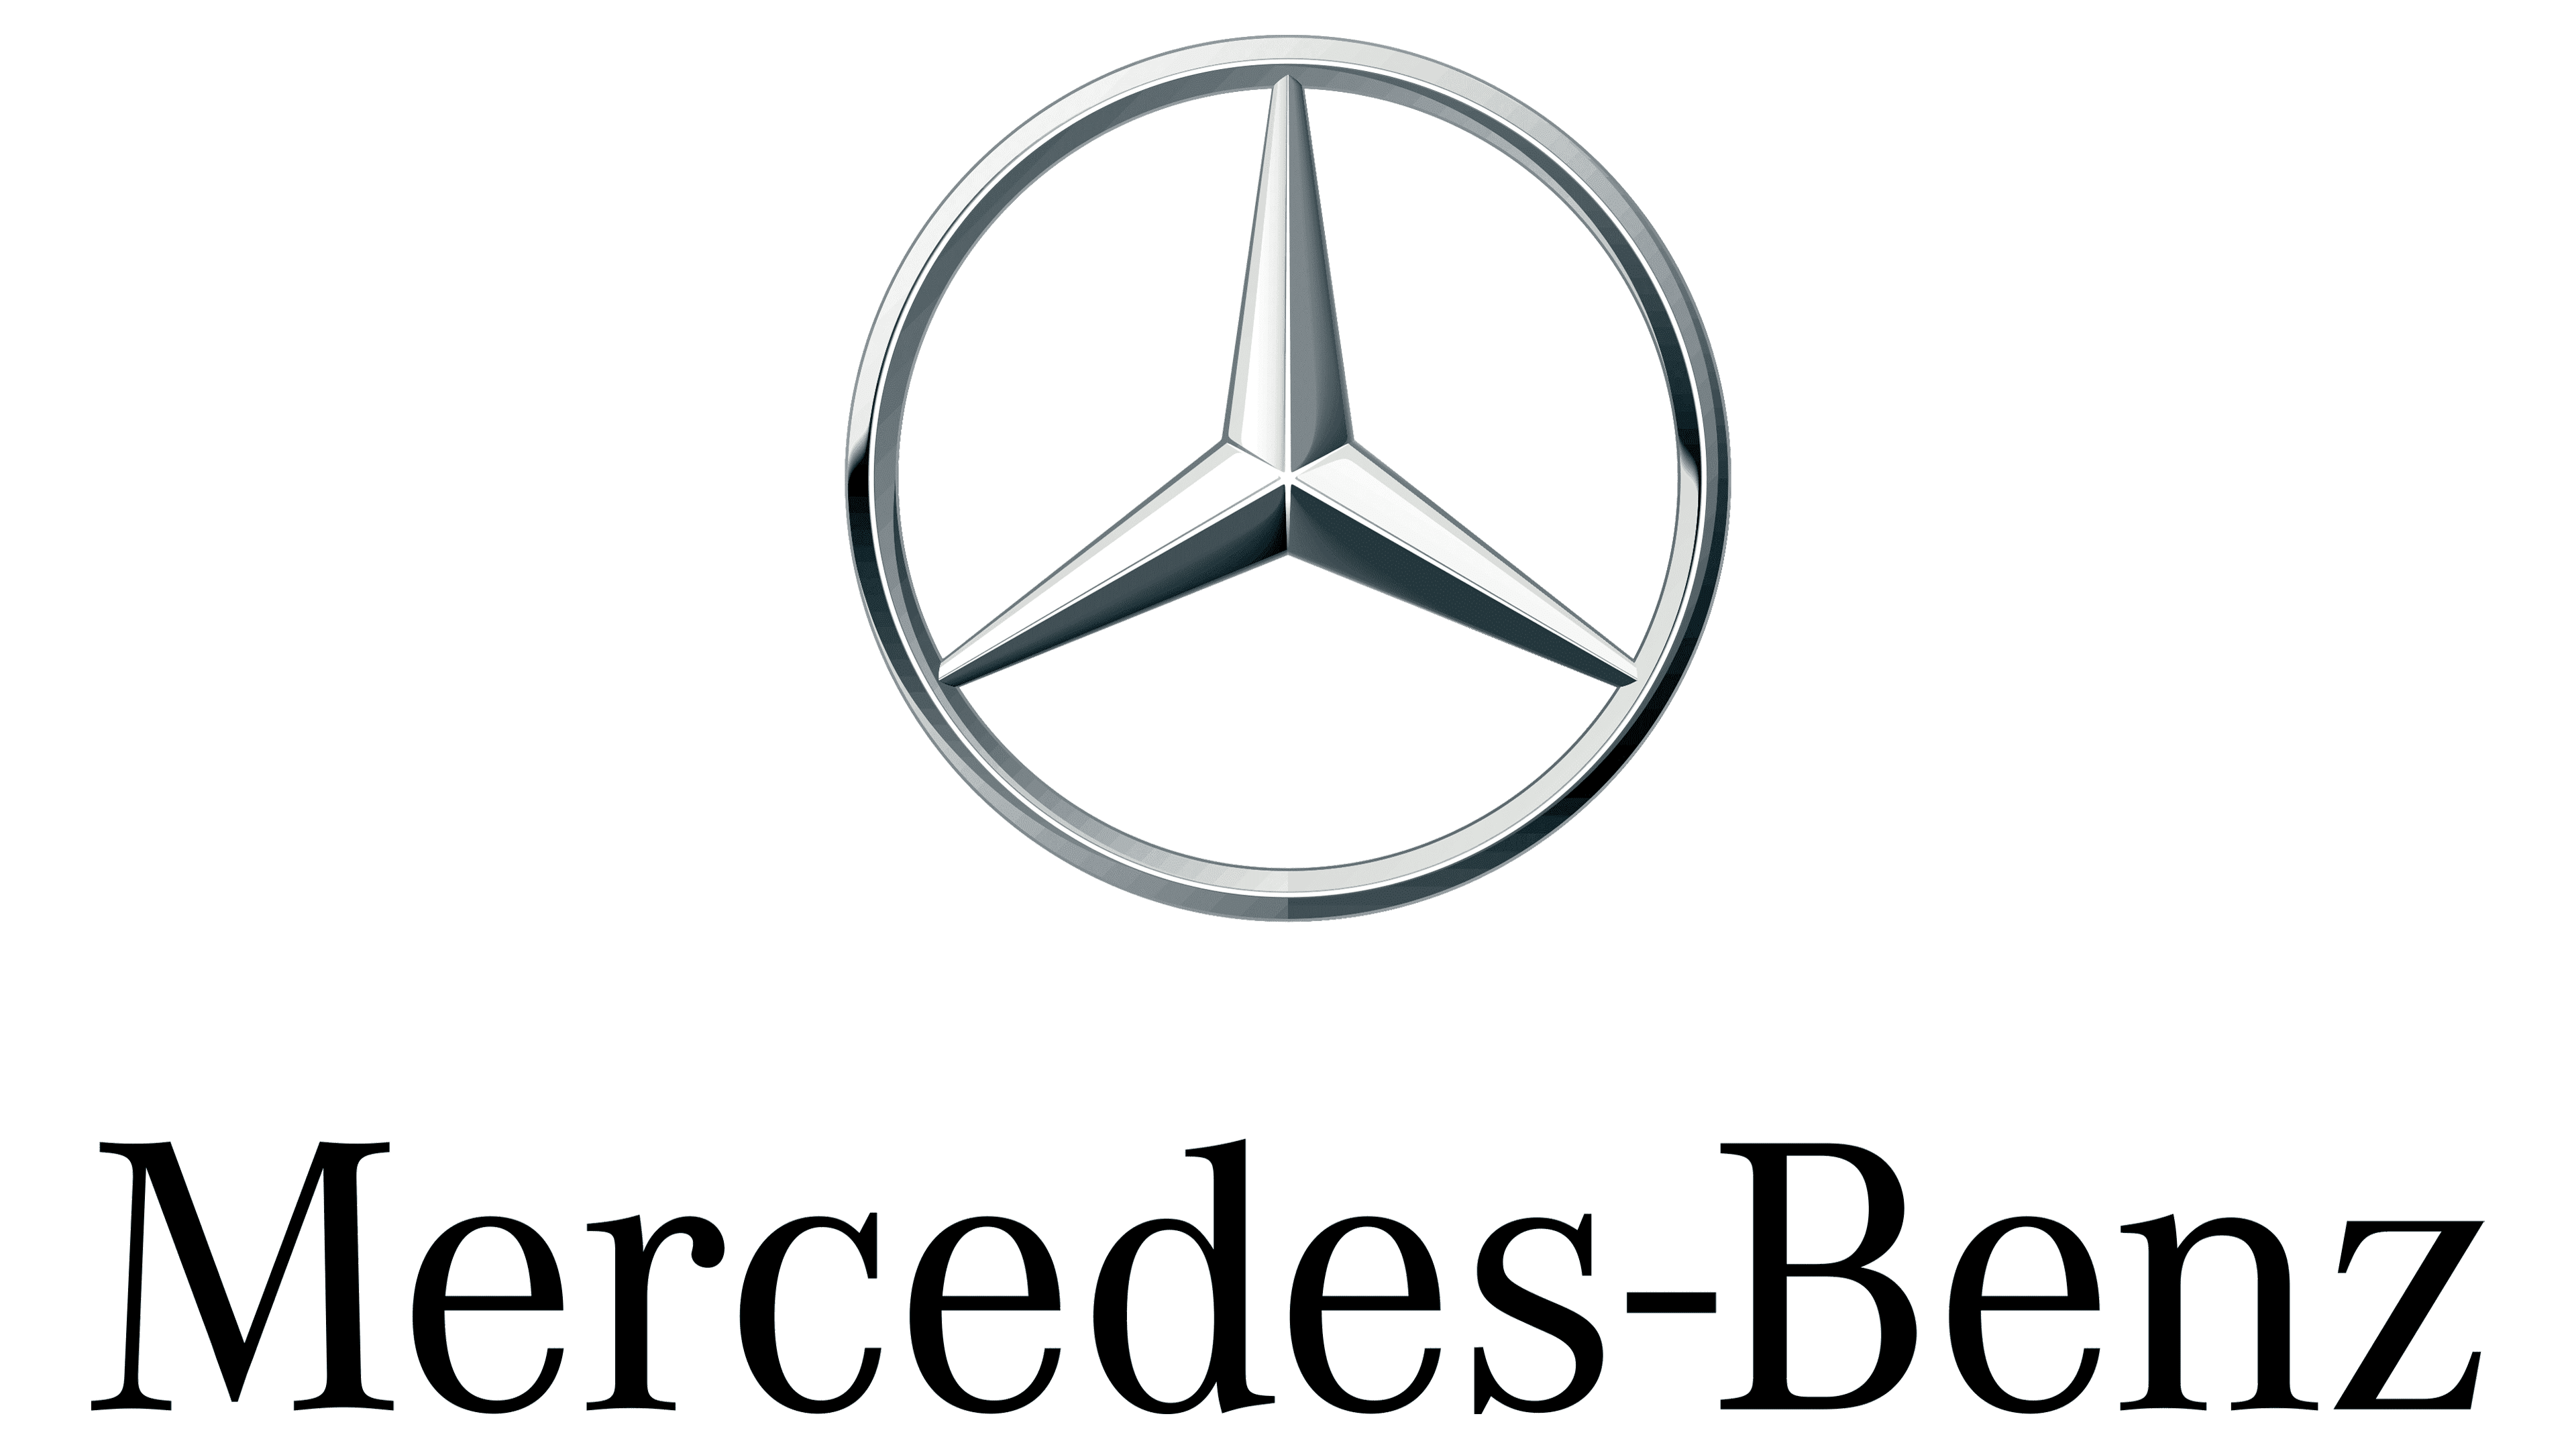 Mercedes-Benz Logo and sign, new logo meaning and history, PNG, SVG